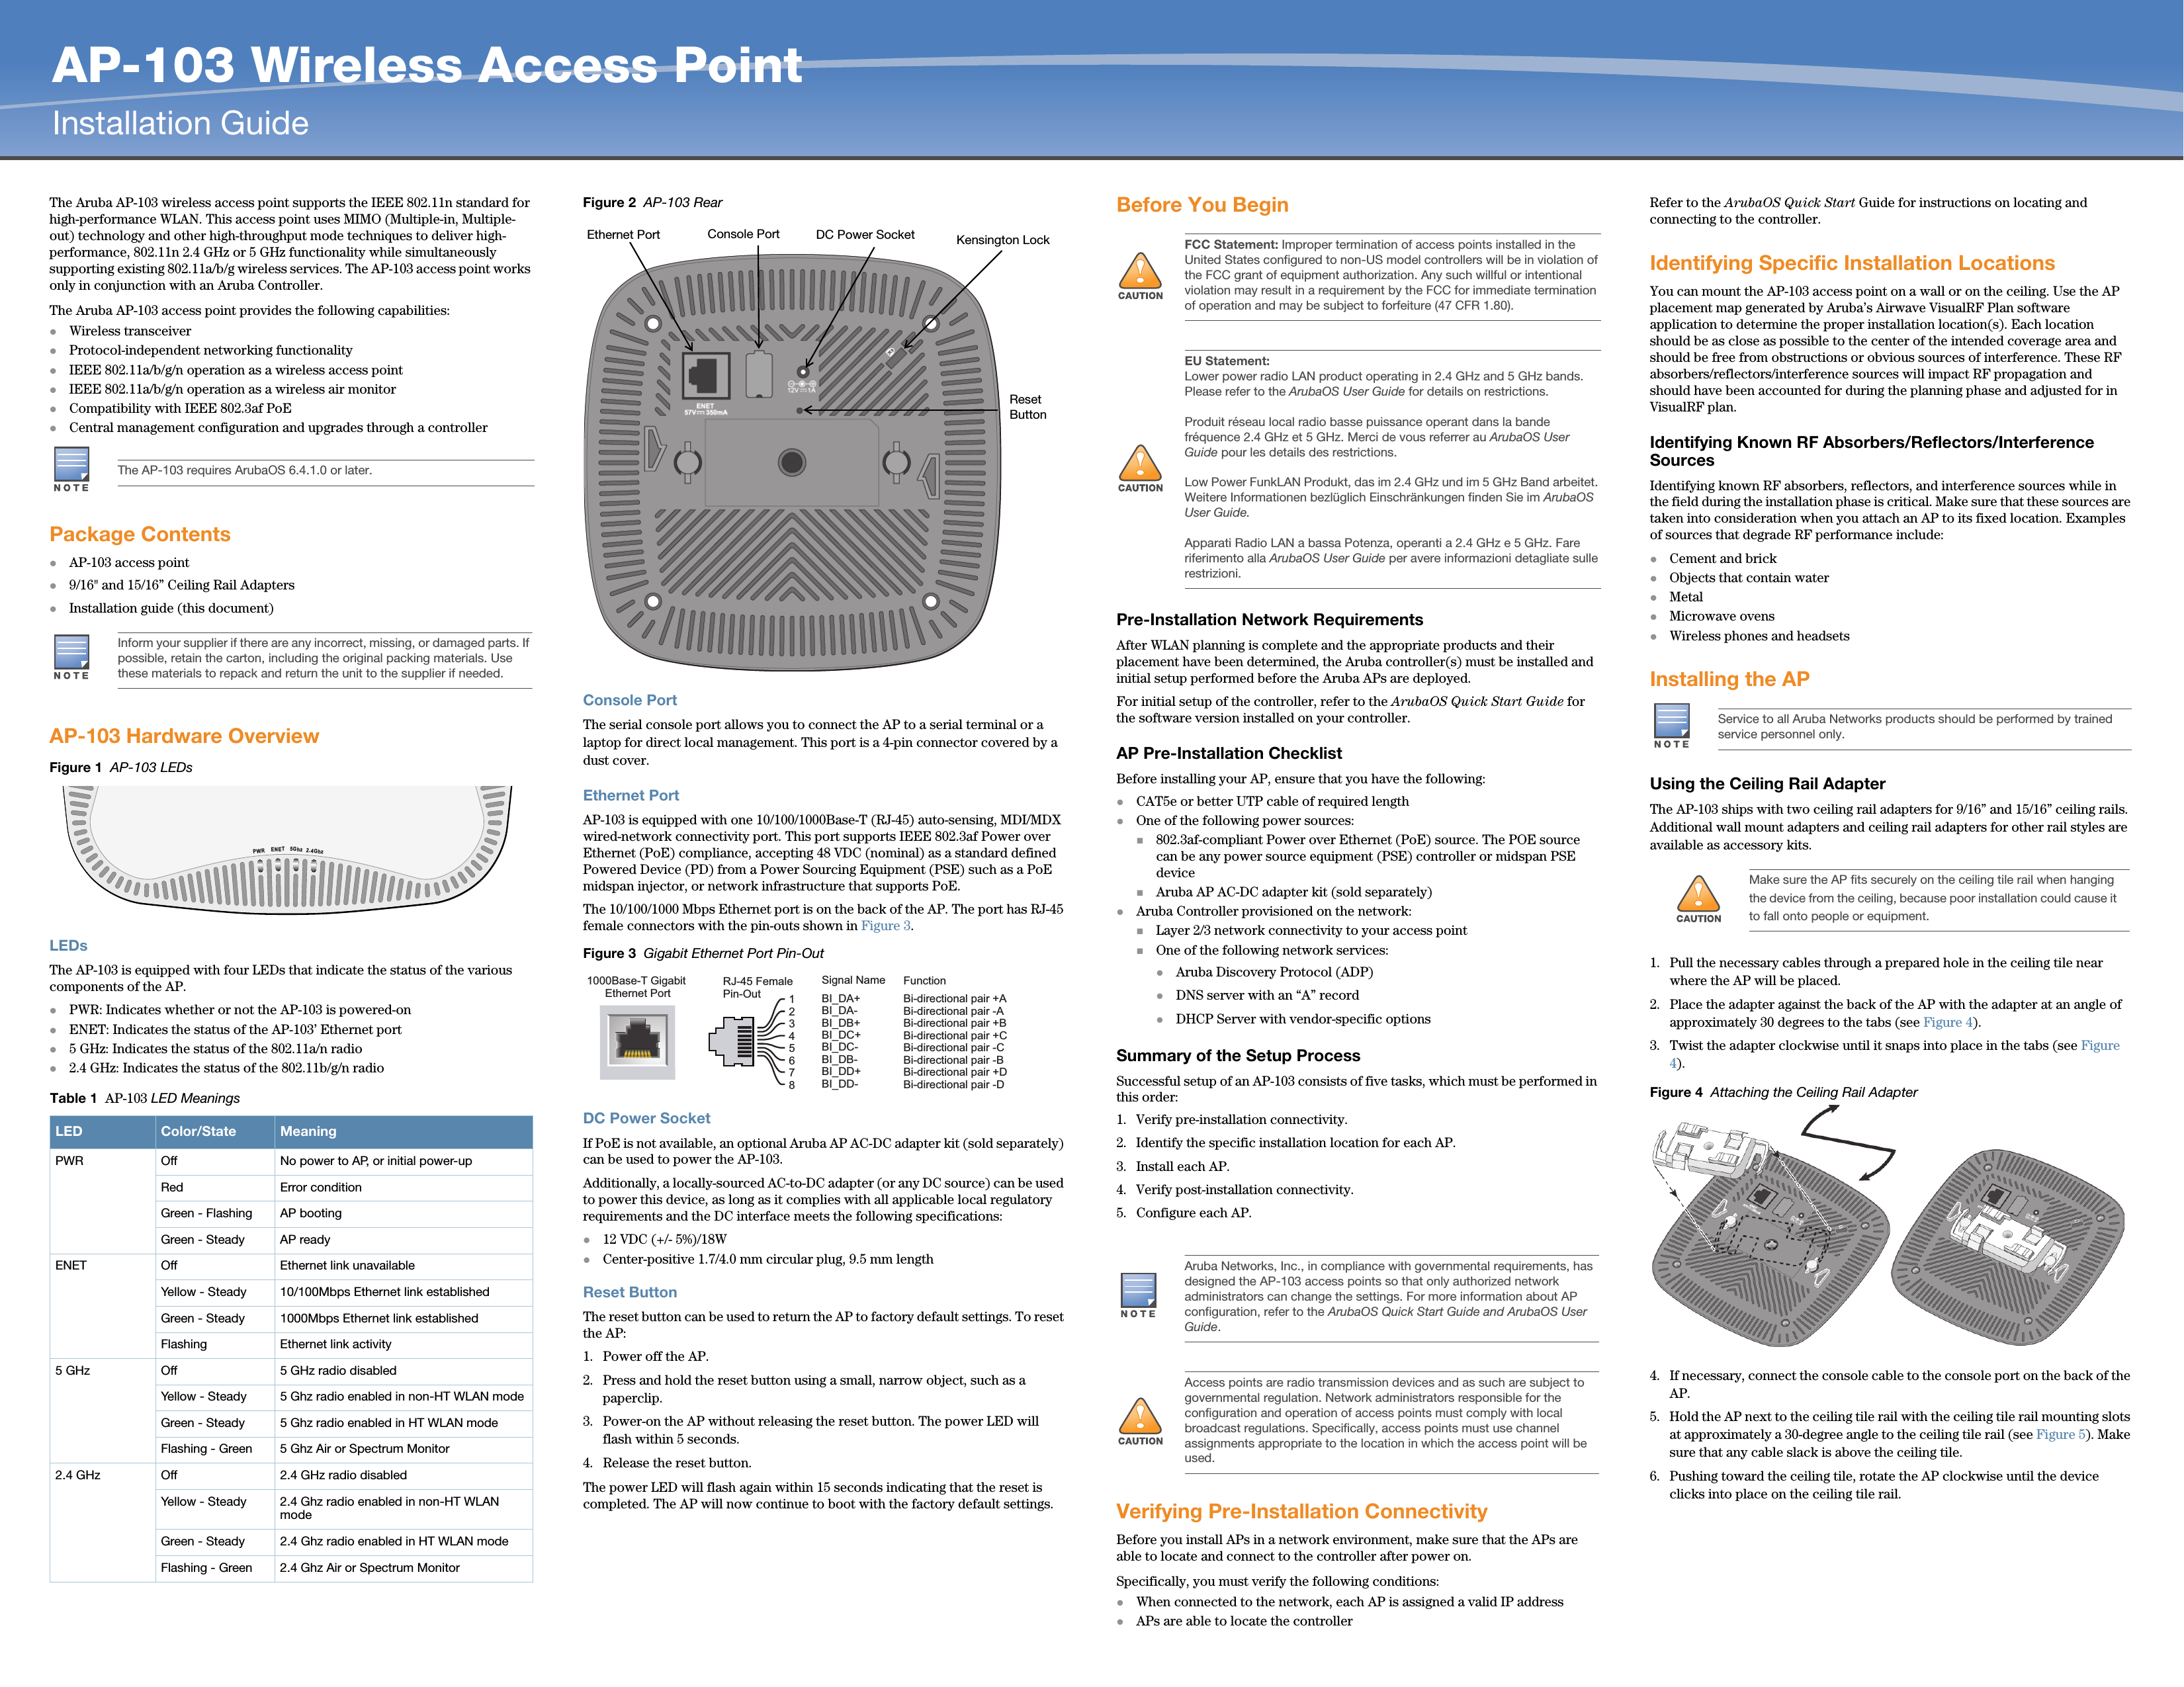 AP-103 Wireless Access PointInstallation GuideThe Aruba AP-103 wireless access point supports the IEEE 802.11n standard for high-performance WLAN. This access point uses MIMO (Multiple-in, Multiple-out) technology and other high-throughput mode techniques to deliver high-performance, 802.11n 2.4 GHz or 5 GHz functionality while simultaneously supporting existing 802.11a/b/g wireless services. The AP-103 access point works only in conjunction with an Aruba Controller.The Aruba AP-103 access point provides the following capabilities:Wireless transceiverProtocol-independent networking functionalityIEEE 802.11a/b/g/n operation as a wireless access pointIEEE 802.11a/b/g/n operation as a wireless air monitorCompatibility with IEEE 802.3af PoE Central management configuration and upgrades through a controllerPackage ContentsAP-103 access point 9/16&quot; and 15/16” Ceiling Rail AdaptersInstallation guide (this document)AP-103 Hardware OverviewFigure 1  AP-103 LEDsLEDsThe AP-103 is equipped with four LEDs that indicate the status of the various components of the AP.PWR: Indicates whether or not the AP-103 is powered-onENET: Indicates the status of the AP-103’ Ethernet port5 GHz: Indicates the status of the 802.11a/n radio2.4 GHz: Indicates the status of the 802.11b/g/n radioFigure 2  AP-103 RearConsole PortThe serial console port allows you to connect the AP to a serial terminal or a laptop for direct local management. This port is a 4-pin connector covered by a dust cover. Ethernet PortAP-103 is equipped with one 10/100/1000Base-T (RJ-45) auto-sensing, MDI/MDX wired-network connectivity port. This port supports IEEE 802.3af Power over Ethernet (PoE) compliance, accepting 48 VDC (nominal) as a standard defined Powered Device (PD) from a Power Sourcing Equipment (PSE) such as a PoE midspan injector, or network infrastructure that supports PoE.The 10/100/1000 Mbps Ethernet port is on the back of the AP. The port has RJ-45 female connectors with the pin-outs shown in Figure 3.Figure 3  Gigabit Ethernet Port Pin-OutDC Power SocketIf PoE is not available, an optional Aruba AP AC-DC adapter kit (sold separately) can be used to power the AP-103. Additionally, a locally-sourced AC-to-DC adapter (or any DC source) can be used to power this device, as long as it complies with all applicable local regulatory requirements and the DC interface meets the following specifications:12 VDC (+/- 5%)/18WCenter-positive 1.7/4.0 mm circular plug, 9.5 mm lengthReset ButtonThe reset button can be used to return the AP to factory default settings. To reset the AP:1. Power off the AP.2. Press and hold the reset button using a small, narrow object, such as a paperclip.3. Power-on the AP without releasing the reset button. The power LED will flash within 5 seconds.4. Release the reset button.The power LED will flash again within 15 seconds indicating that the reset is completed. The AP will now continue to boot with the factory default settings.Before You BeginPre-Installation Network RequirementsAfter WLAN planning is complete and the appropriate products and their placement have been determined, the Aruba controller(s) must be installed and initial setup performed before the Aruba APs are deployed.For initial setup of the controller, refer to the ArubaOS Quick Start Guide for the software version installed on your controller.AP Pre-Installation ChecklistBefore installing your AP, ensure that you have the following:CAT5e or better UTP cable of required lengthOne of the following power sources:802.3af-compliant Power over Ethernet (PoE) source. The POE source can be any power source equipment (PSE) controller or midspan PSE deviceAruba AP AC-DC adapter kit (sold separately)Aruba Controller provisioned on the network:Layer 2/3 network connectivity to your access pointOne of the following network services:Aruba Discovery Protocol (ADP)DNS server with an “A” recordDHCP Server with vendor-specific optionsSummary of the Setup ProcessSuccessful setup of an AP-103 consists of five tasks, which must be performed in this order:1. Verify pre-installation connectivity.2. Identify the specific installation location for each AP.3. Install each AP.4. Verify post-installation connectivity.5. Configure each AP.Verifying Pre-Installation ConnectivityBefore you install APs in a network environment, make sure that the APs are able to locate and connect to the controller after power on.Specifically, you must verify the following conditions:When connected to the network, each AP is assigned a valid IP addressAPs are able to locate the controller Refer to the ArubaOS Quick Start Guide for instructions on locating and connecting to the controller.Identifying Specific Installation LocationsYou can mount the AP-103 access point on a wall or on the ceiling. Use the AP placement map generated by Aruba’s Airwave VisualRF Plan software application to determine the proper installation location(s). Each location should be as close as possible to the center of the intended coverage area and should be free from obstructions or obvious sources of interference. These RF absorbers/reflectors/interference sources will impact RF propagation and should have been accounted for during the planning phase and adjusted for in VisualRF plan.Identifying Known RF Absorbers/Reflectors/Interference SourcesIdentifying known RF absorbers, reflectors, and interference sources while in the field during the installation phase is critical. Make sure that these sources are taken into consideration when you attach an AP to its fixed location. Examples of sources that degrade RF performance include:Cement and brickObjects that contain waterMetalMicrowave ovensWireless phones and headsetsInstalling the APUsing the Ceiling Rail AdapterThe AP-103 ships with two ceiling rail adapters for 9/16” and 15/16” ceiling rails. Additional wall mount adapters and ceiling rail adapters for other rail styles are available as accessory kits.1. Pull the necessary cables through a prepared hole in the ceiling tile near where the AP will be placed.2. Place the adapter against the back of the AP with the adapter at an angle of approximately 30 degrees to the tabs (see Figure 4).3. Twist the adapter clockwise until it snaps into place in the tabs (see Figure 4).Figure 4  Attaching the Ceiling Rail Adapter4. If necessary, connect the console cable to the console port on the back of the AP.5. Hold the AP next to the ceiling tile rail with the ceiling tile rail mounting slots at approximately a 30-degree angle to the ceiling tile rail (see Figure 5). Make sure that any cable slack is above the ceiling tile.6. Pushing toward the ceiling tile, rotate the AP clockwise until the device clicks into place on the ceiling tile rail.The AP-103 requires ArubaOS 6.4.1.0 or later.Inform your supplier if there are any incorrect, missing, or damaged parts. If possible, retain the carton, including the original packing materials. Use these materials to repack and return the unit to the supplier if needed.Table 1  AP-103 LED MeaningsLED Color/State MeaningPWR Off No power to AP, or initial power-upRed Error conditionGreen - Flashing AP bootingGreen - Steady AP readyENET Off Ethernet link unavailableYellow - Steady 10/100Mbps Ethernet link establishedGreen - Steady 1000Mbps Ethernet link establishedFlashing Ethernet link activity5 GHz Off 5 GHz radio disabledYellow - Steady 5 Ghz radio enabled in non-HT WLAN modeGreen - Steady 5 Ghz radio enabled in HT WLAN modeFlashing - Green  5 Ghz Air or Spectrum Monitor2.4 GHz Off 2.4 GHz radio disabledYellow - Steady 2.4 Ghz radio enabled in non-HT WLAN modeGreen - Steady 2.4 Ghz radio enabled in HT WLAN modeFlashing - Green  2.4 Ghz Air or Spectrum Monitor2.4Ghz5GhzENETPWREthernet Port Console Port  DC Power Socket Kensington LockReset Button1000Base-T Gigabit Ethernet PortRJ-45 FemalePin-OutSignal Name12345678BI_DC+BI_DC-BI_DD+BI_DD-BI_DA+BI_DA-BI_DB+BI_DB-FunctionBi-directional pair +CBi-directional pair -CBi-directional pair +DBi-directional pair -DBi-directional pair +ABi-directional pair -ABi-directional pair +BBi-directional pair -B     !FCC Statement: Improper termination of access points installed in the United States configured to non-US model controllers will be in violation of the FCC grant of equipment authorization. Any such willful or intentional violation may result in a requirement by the FCC for immediate termination of operation and may be subject to forfeiture (47 CFR 1.80).!EU Statement: Lower power radio LAN product operating in 2.4 GHz and 5 GHz bands. Please refer to the ArubaOS User Guide for details on restrictions.Produit réseau local radio basse puissance operant dans la bande fréquence 2.4 GHz et 5 GHz. Merci de vous referrer au ArubaOS User Guide pour les details des restrictions.Low Power FunkLAN Produkt, das im 2.4 GHz und im 5 GHz Band arbeitet. Weitere Informationen bezlüglich Einschränkungen finden Sie im ArubaOS User Guide.Apparati Radio LAN a bassa Potenza, operanti a 2.4 GHz e 5 GHz. Fare riferimento alla ArubaOS User Guide per avere informazioni detagliate sulle restrizioni.Aruba Networks, Inc., in compliance with governmental requirements, has designed the AP-103 access points so that only authorized network administrators can change the settings. For more information about AP configuration, refer to the ArubaOS Quick Start Guide and ArubaOS User Guide.!Access points are radio transmission devices and as such are subject to governmental regulation. Network administrators responsible for the configuration and operation of access points must comply with local broadcast regulations. Specifically, access points must use channel assignments appropriate to the location in which the access point will be used.Service to all Aruba Networks products should be performed by trained service personnel only.!Make sure the AP fits securely on the ceiling tile rail when hanging the device from the ceiling, because poor installation could cause it to fall onto people or equipment.